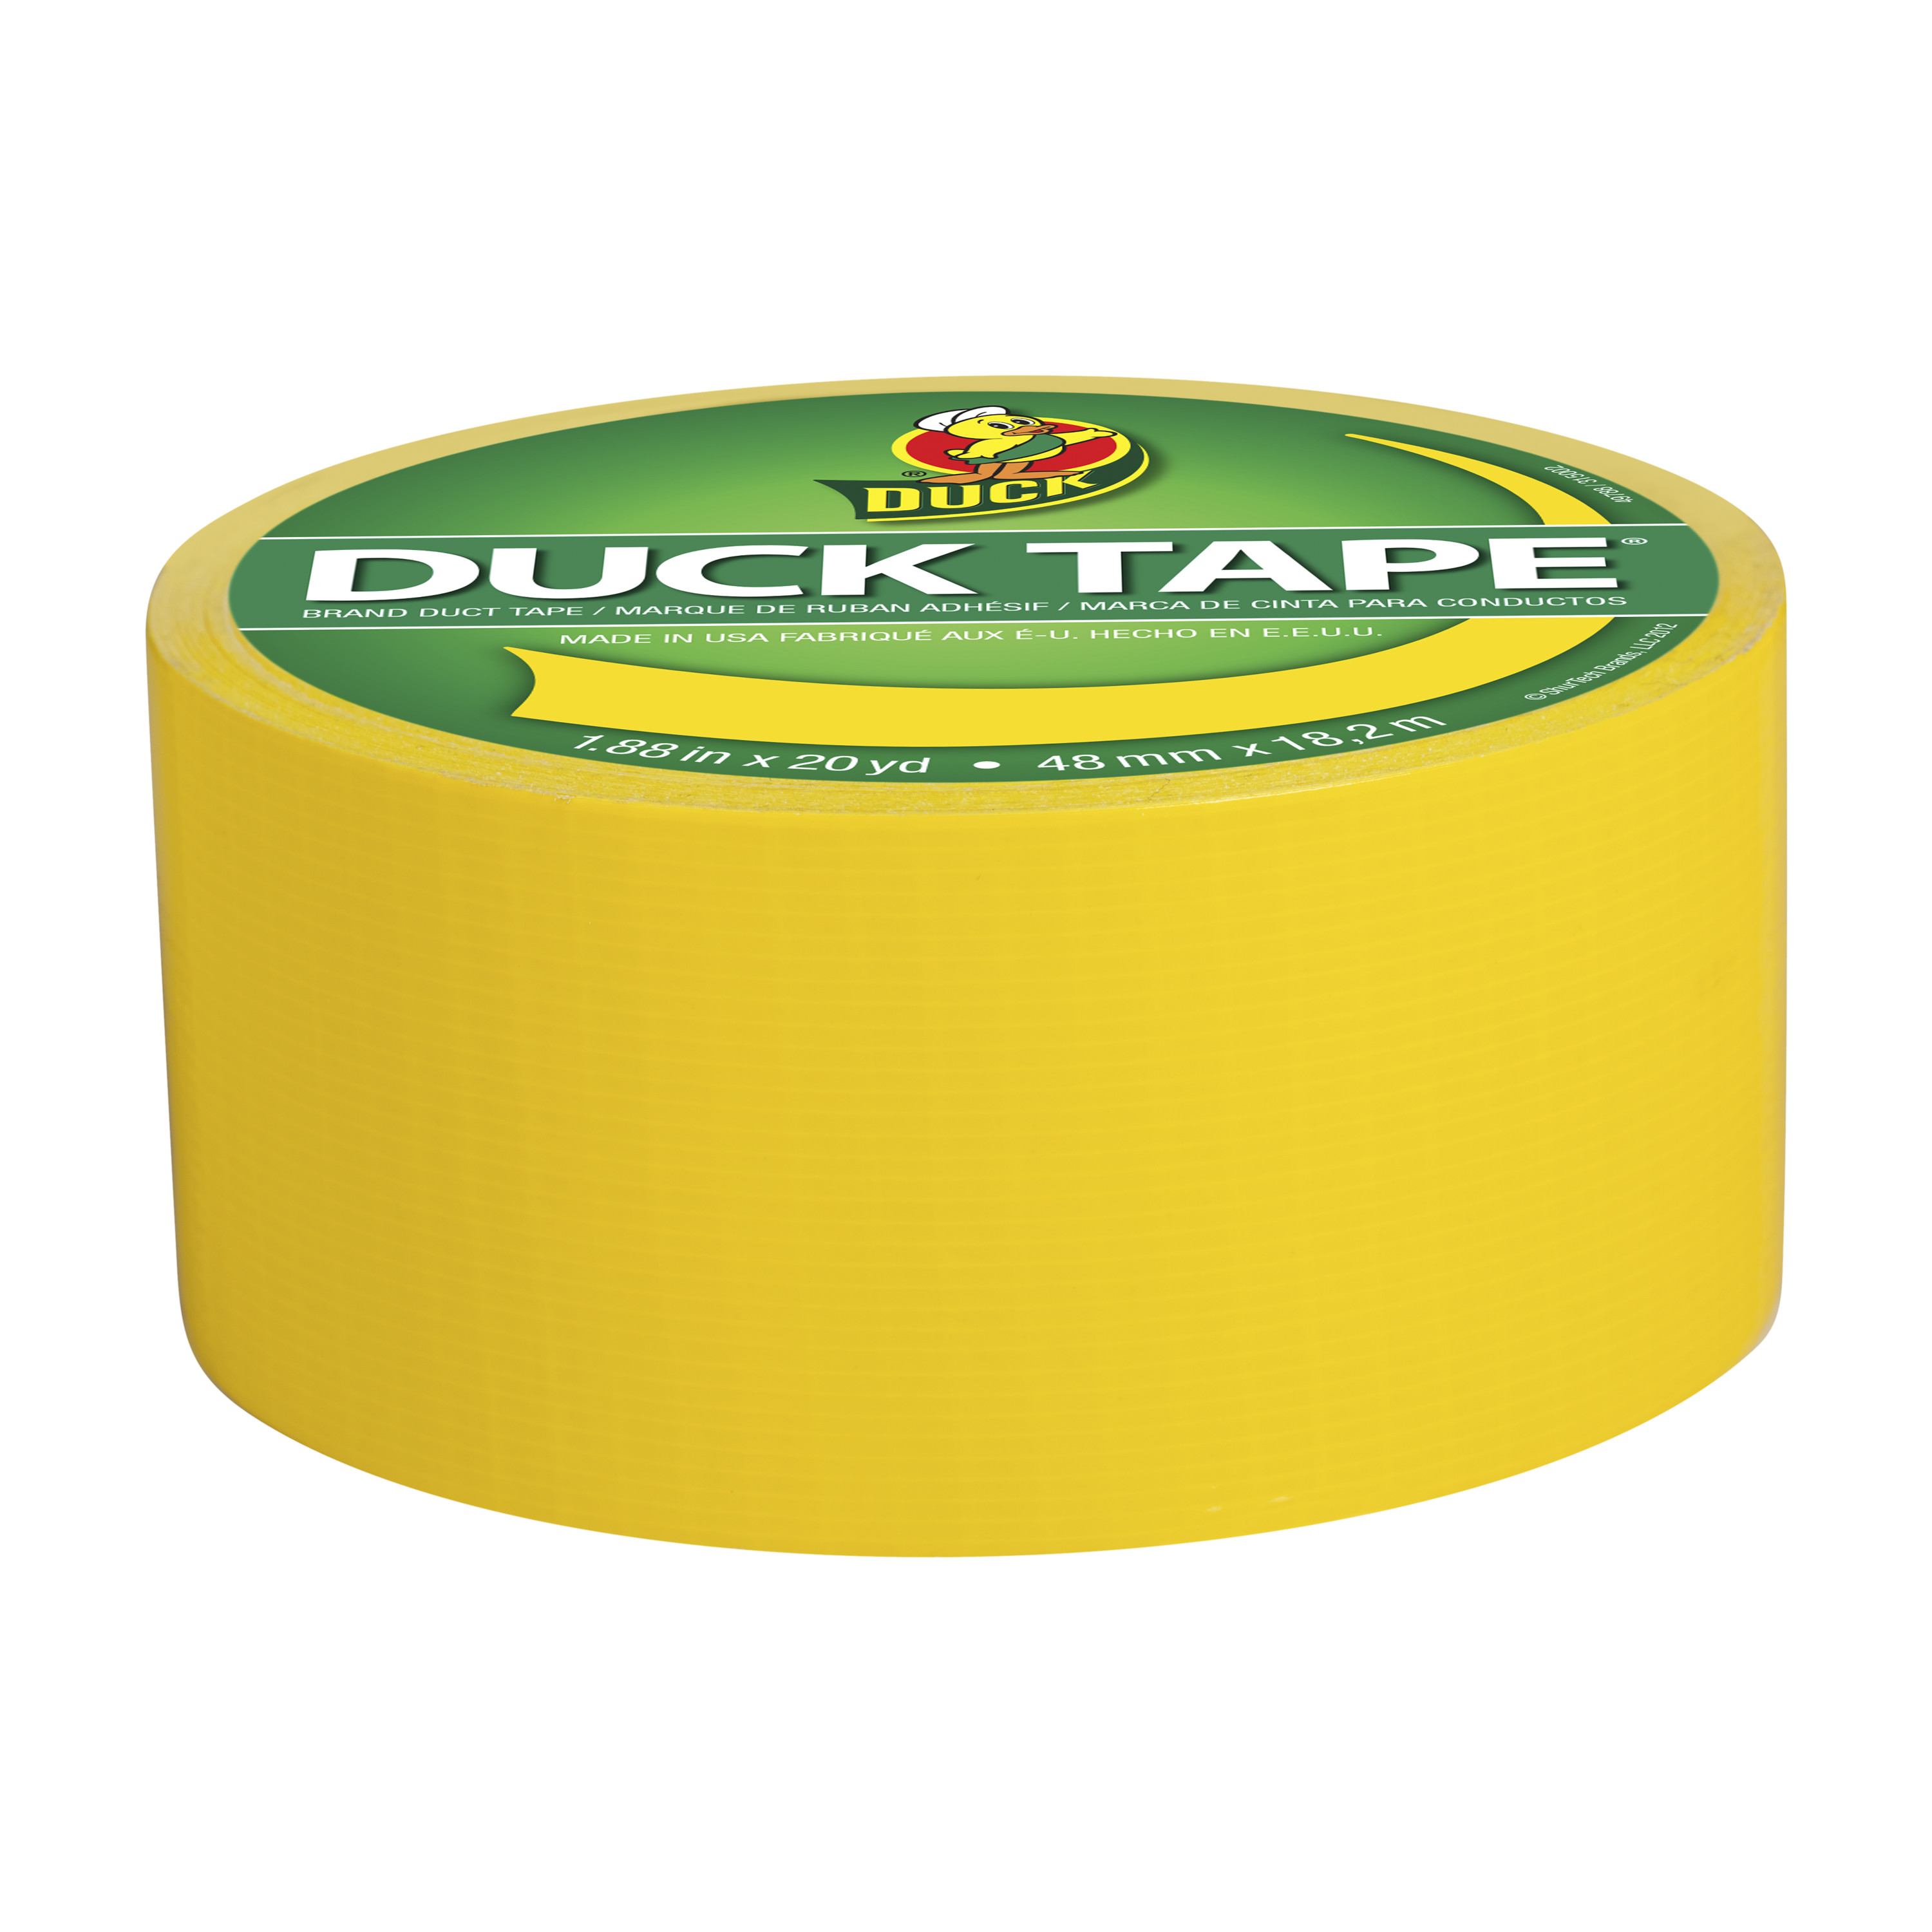 Duck Tape Brand Yellow Duct Tape, 1.88 in. x 20 yd. - image 3 of 10